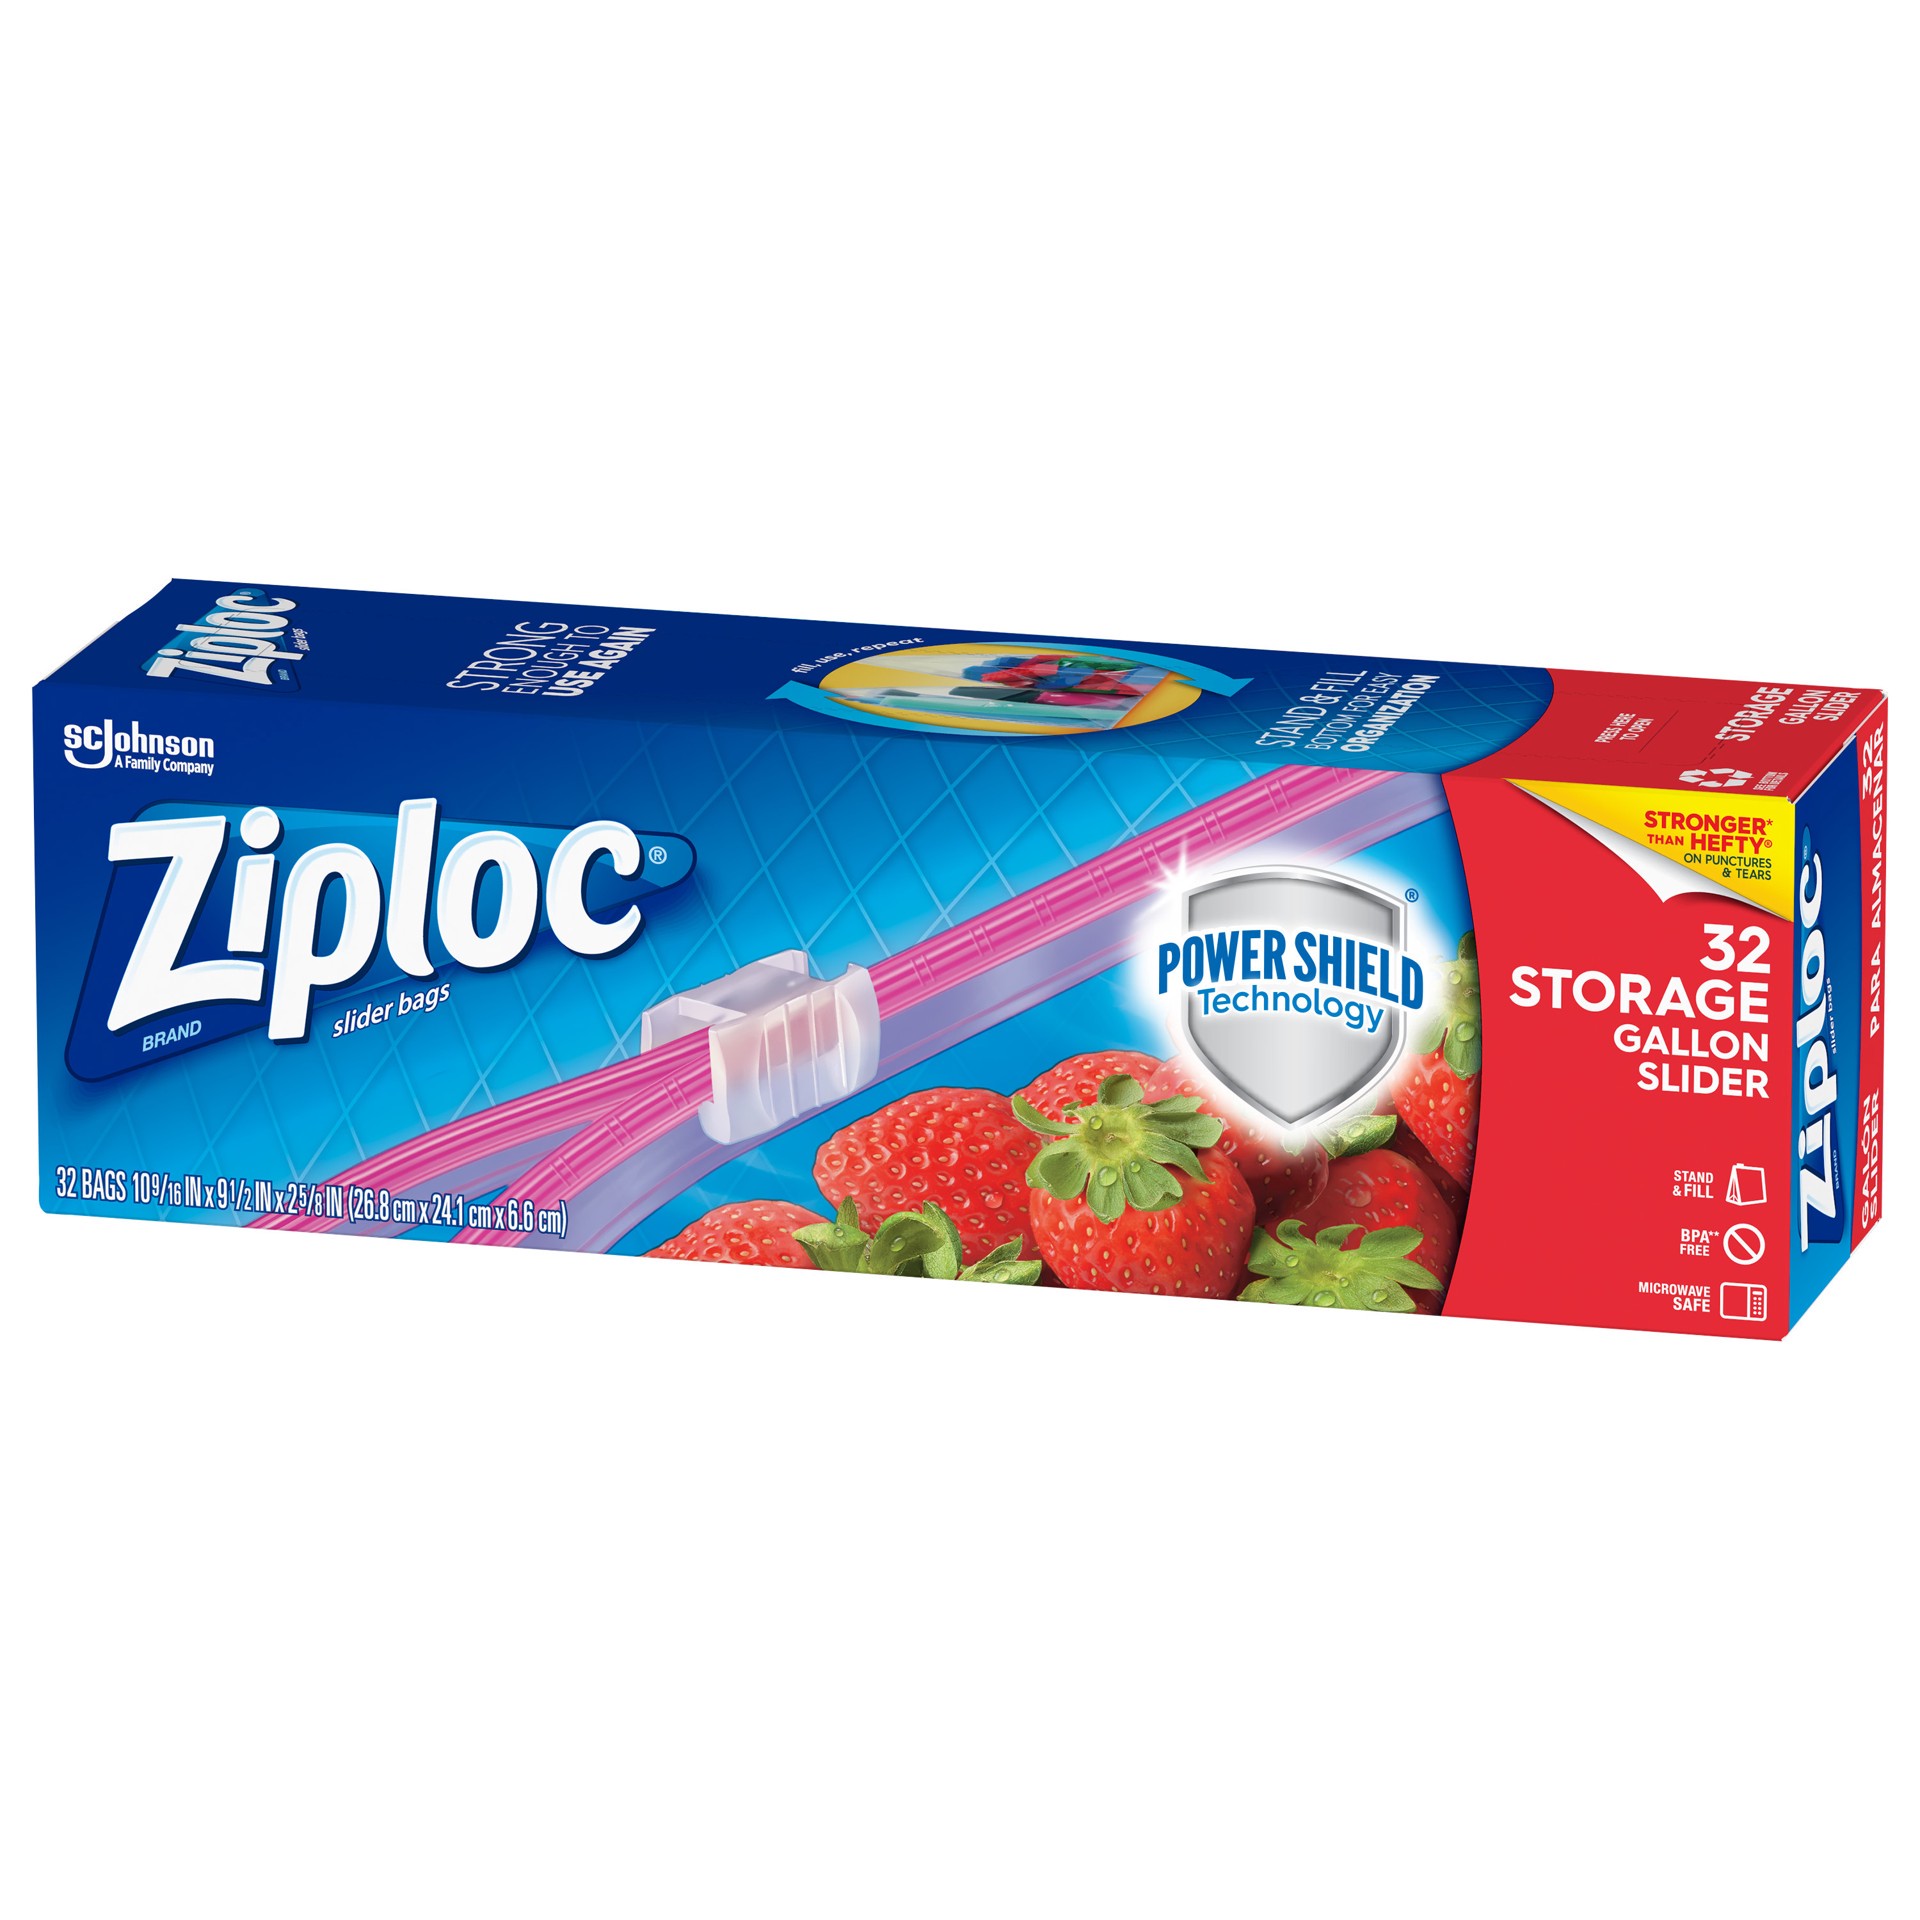 slide 2 of 4, Ziploc Slider Storage Gallon Bags with Power Shield Technology, 32 Count, 32 ct